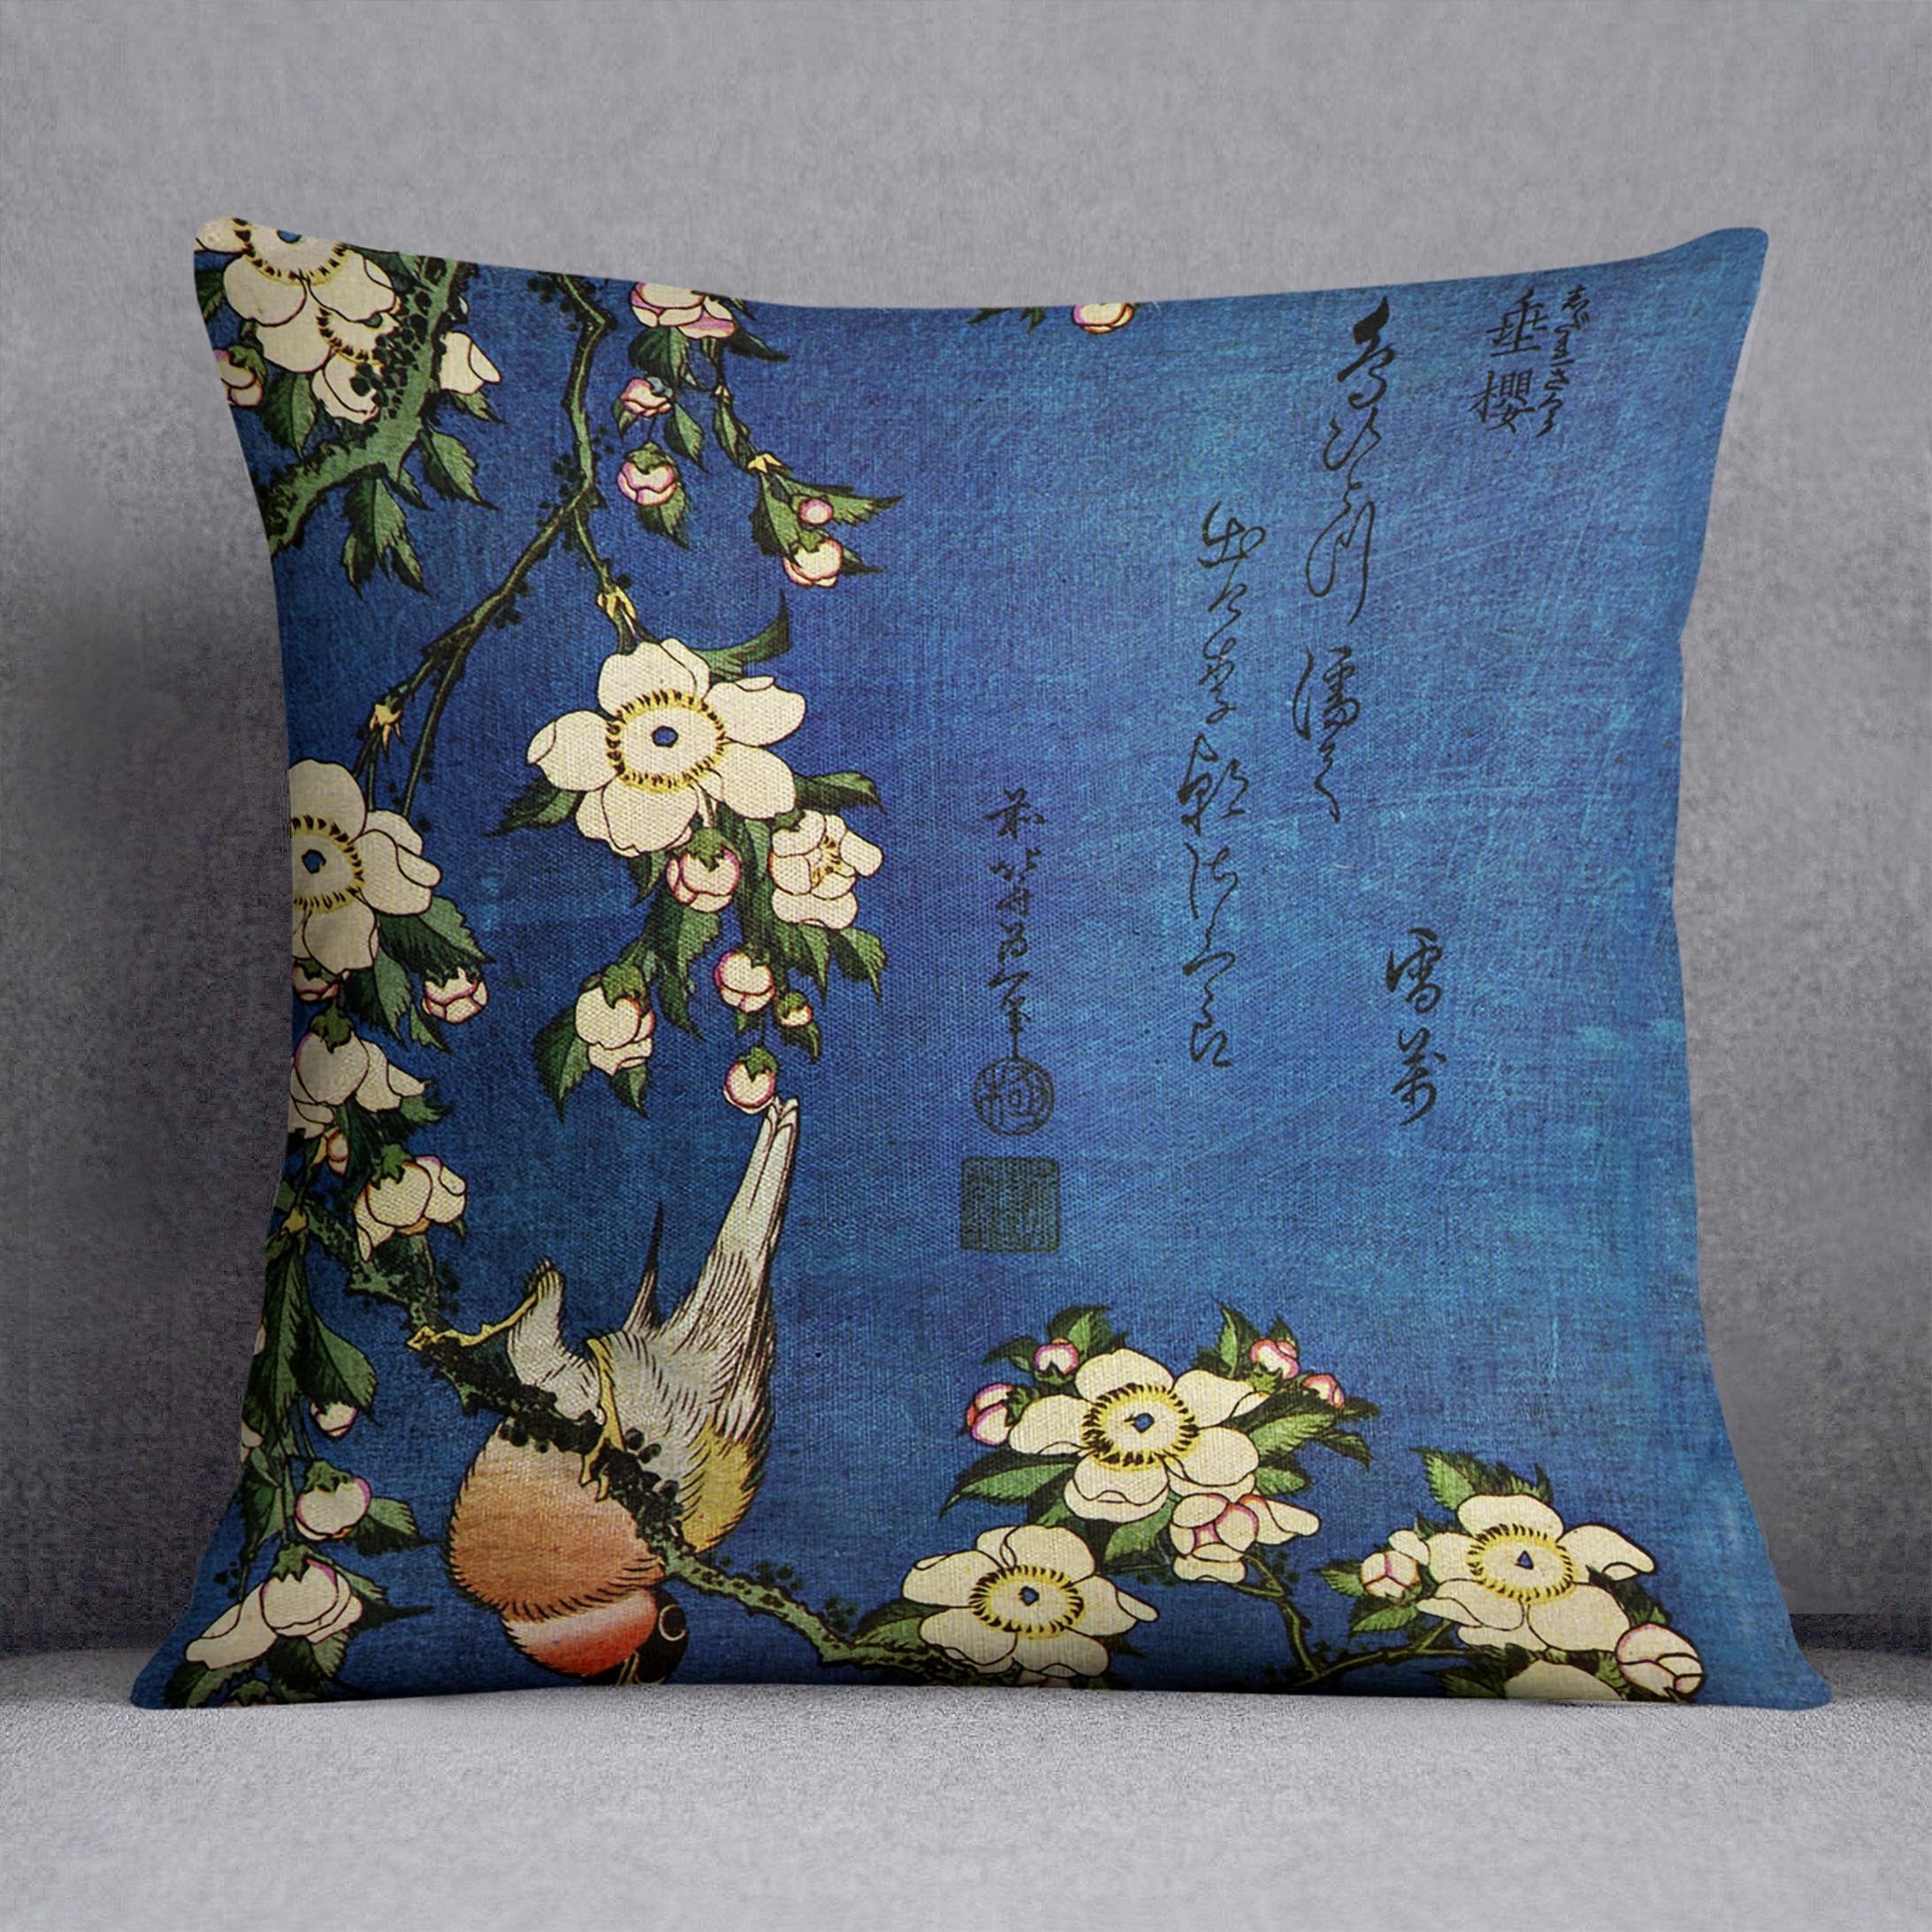 Bullfinch and drooping cherry by Hokusai Throw Pillow